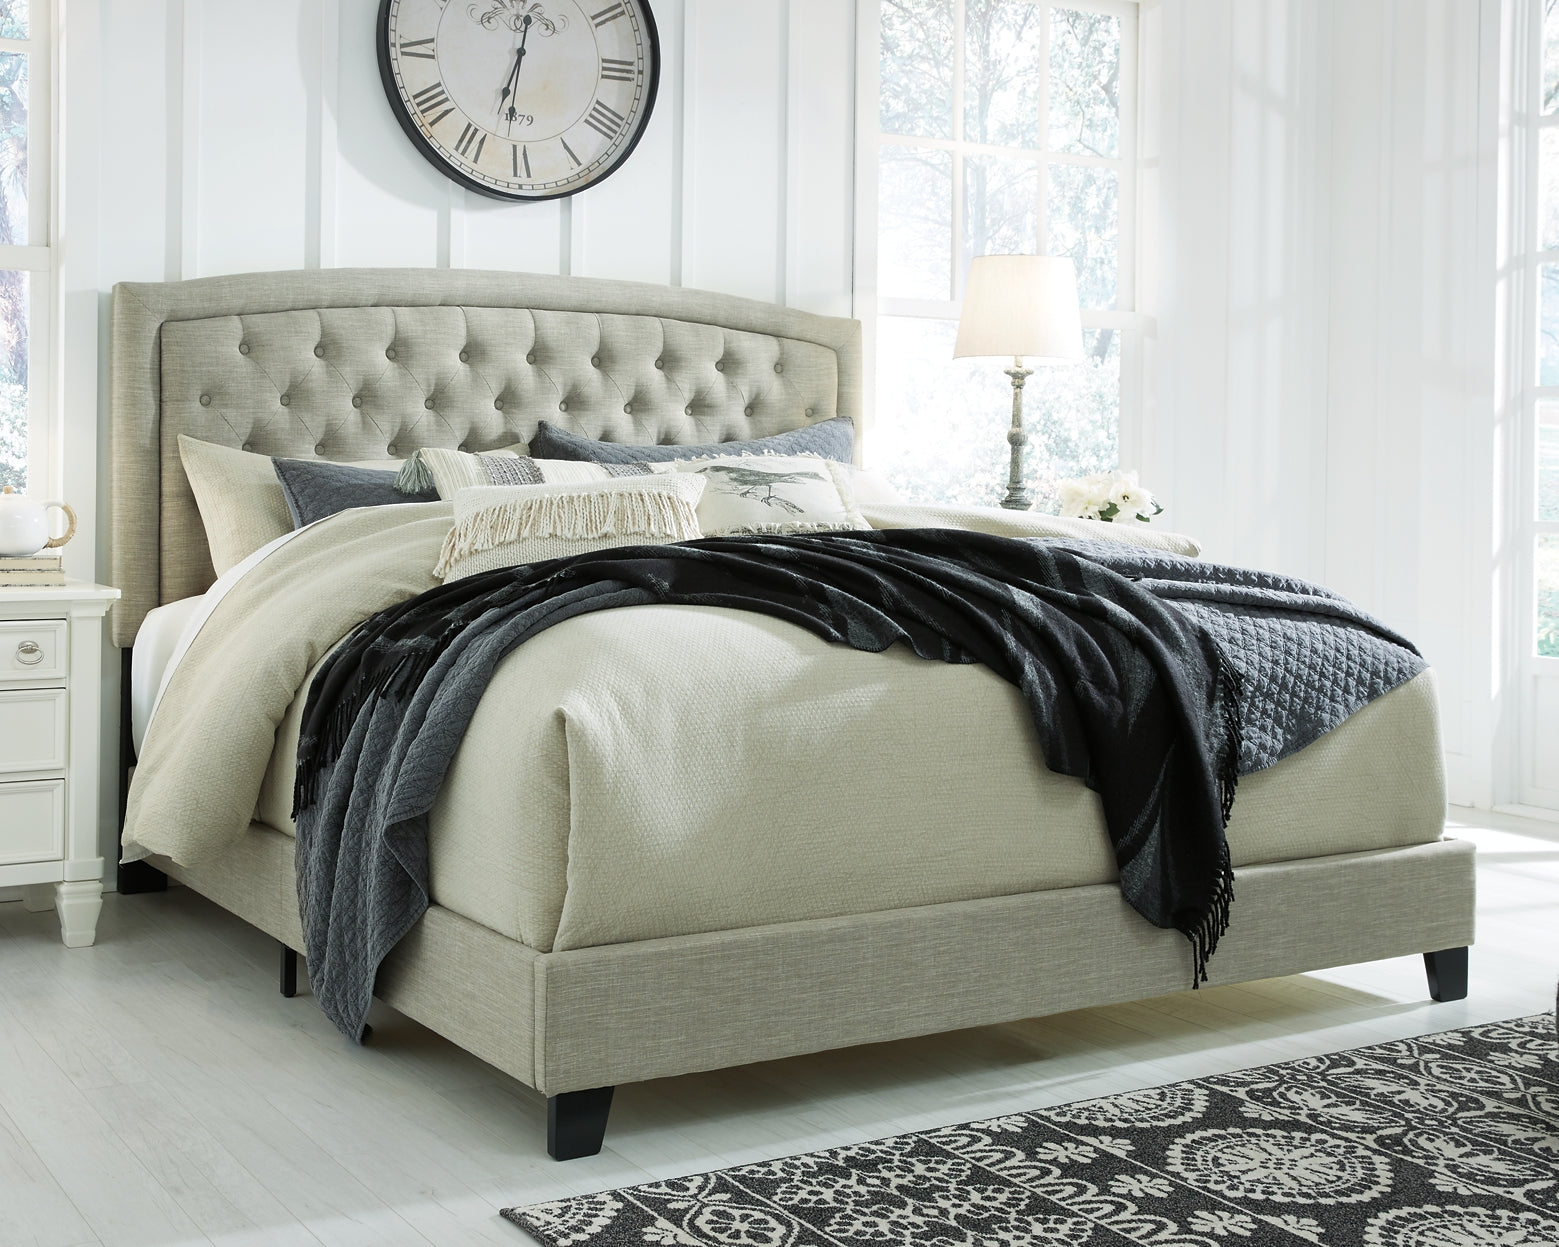 Jerary Queen Upholstered Bed at Walker Mattress and Furniture Locations in Cedar Park and Belton TX.